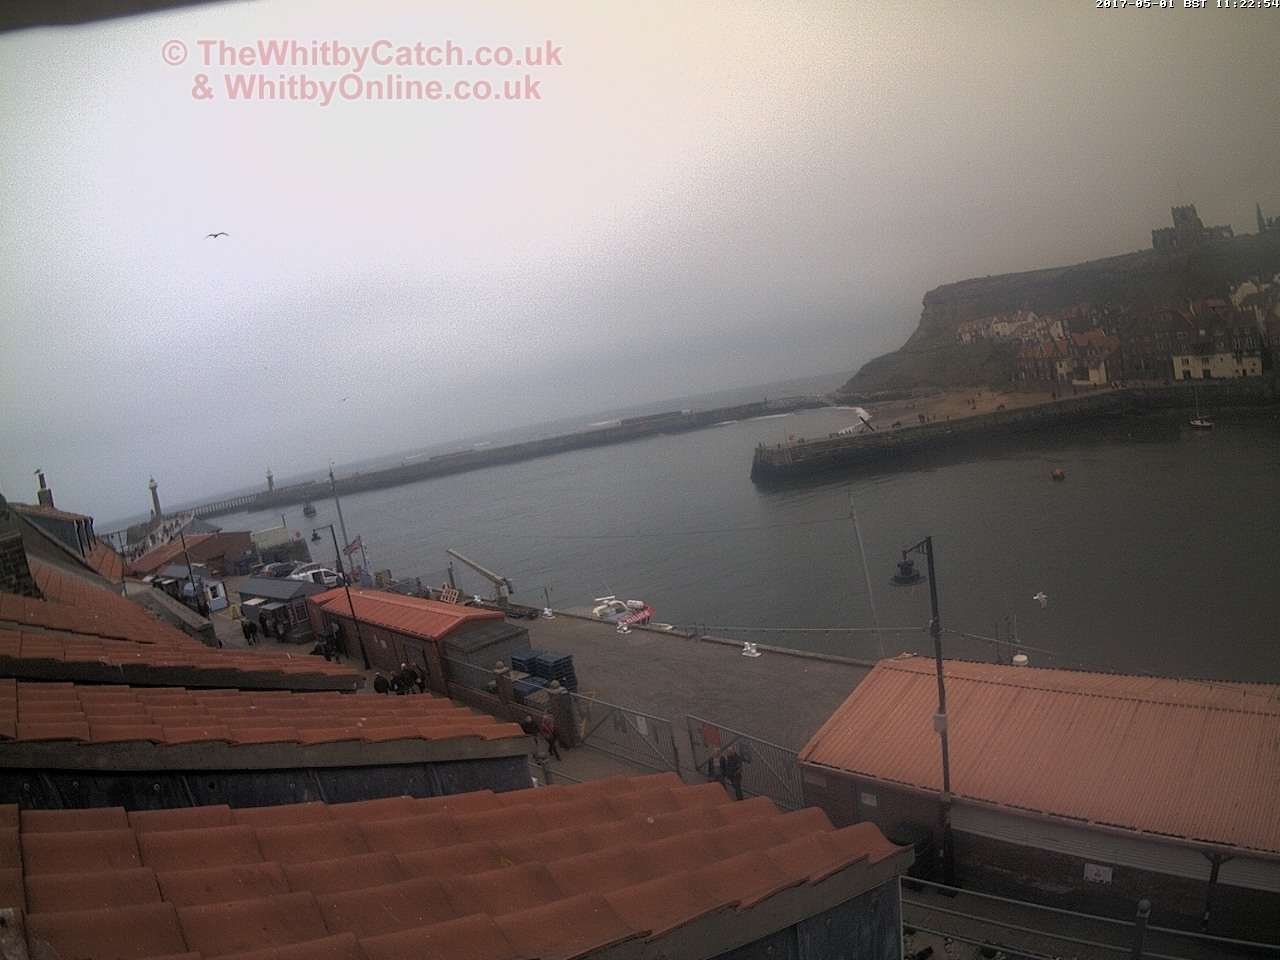 Whitby Mon 1st May 2017 11:23.